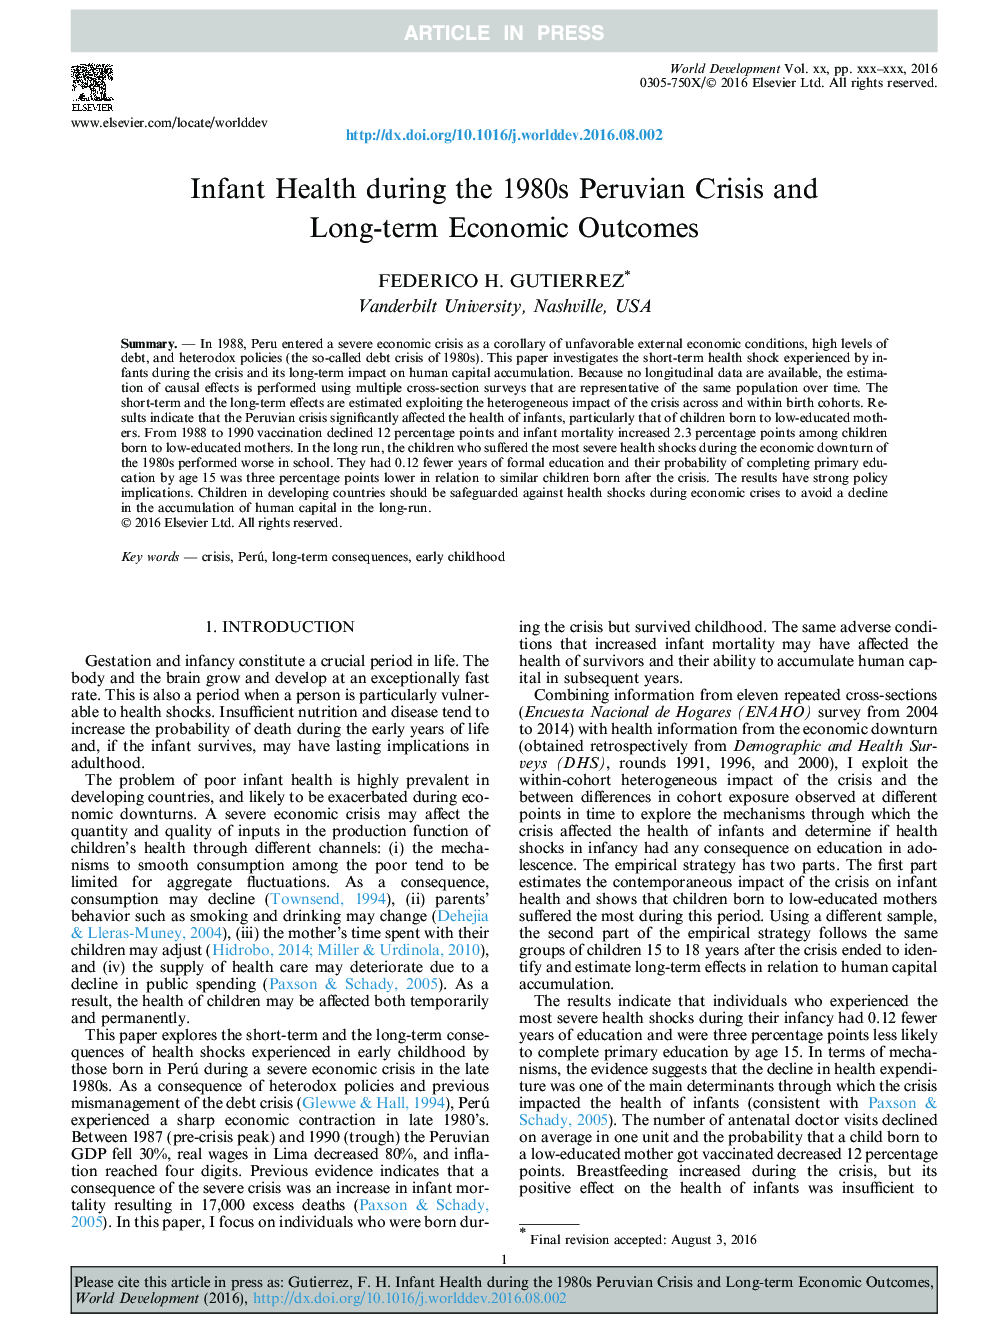 Infant Health during the 1980s Peruvian Crisis and Long-term Economic Outcomes